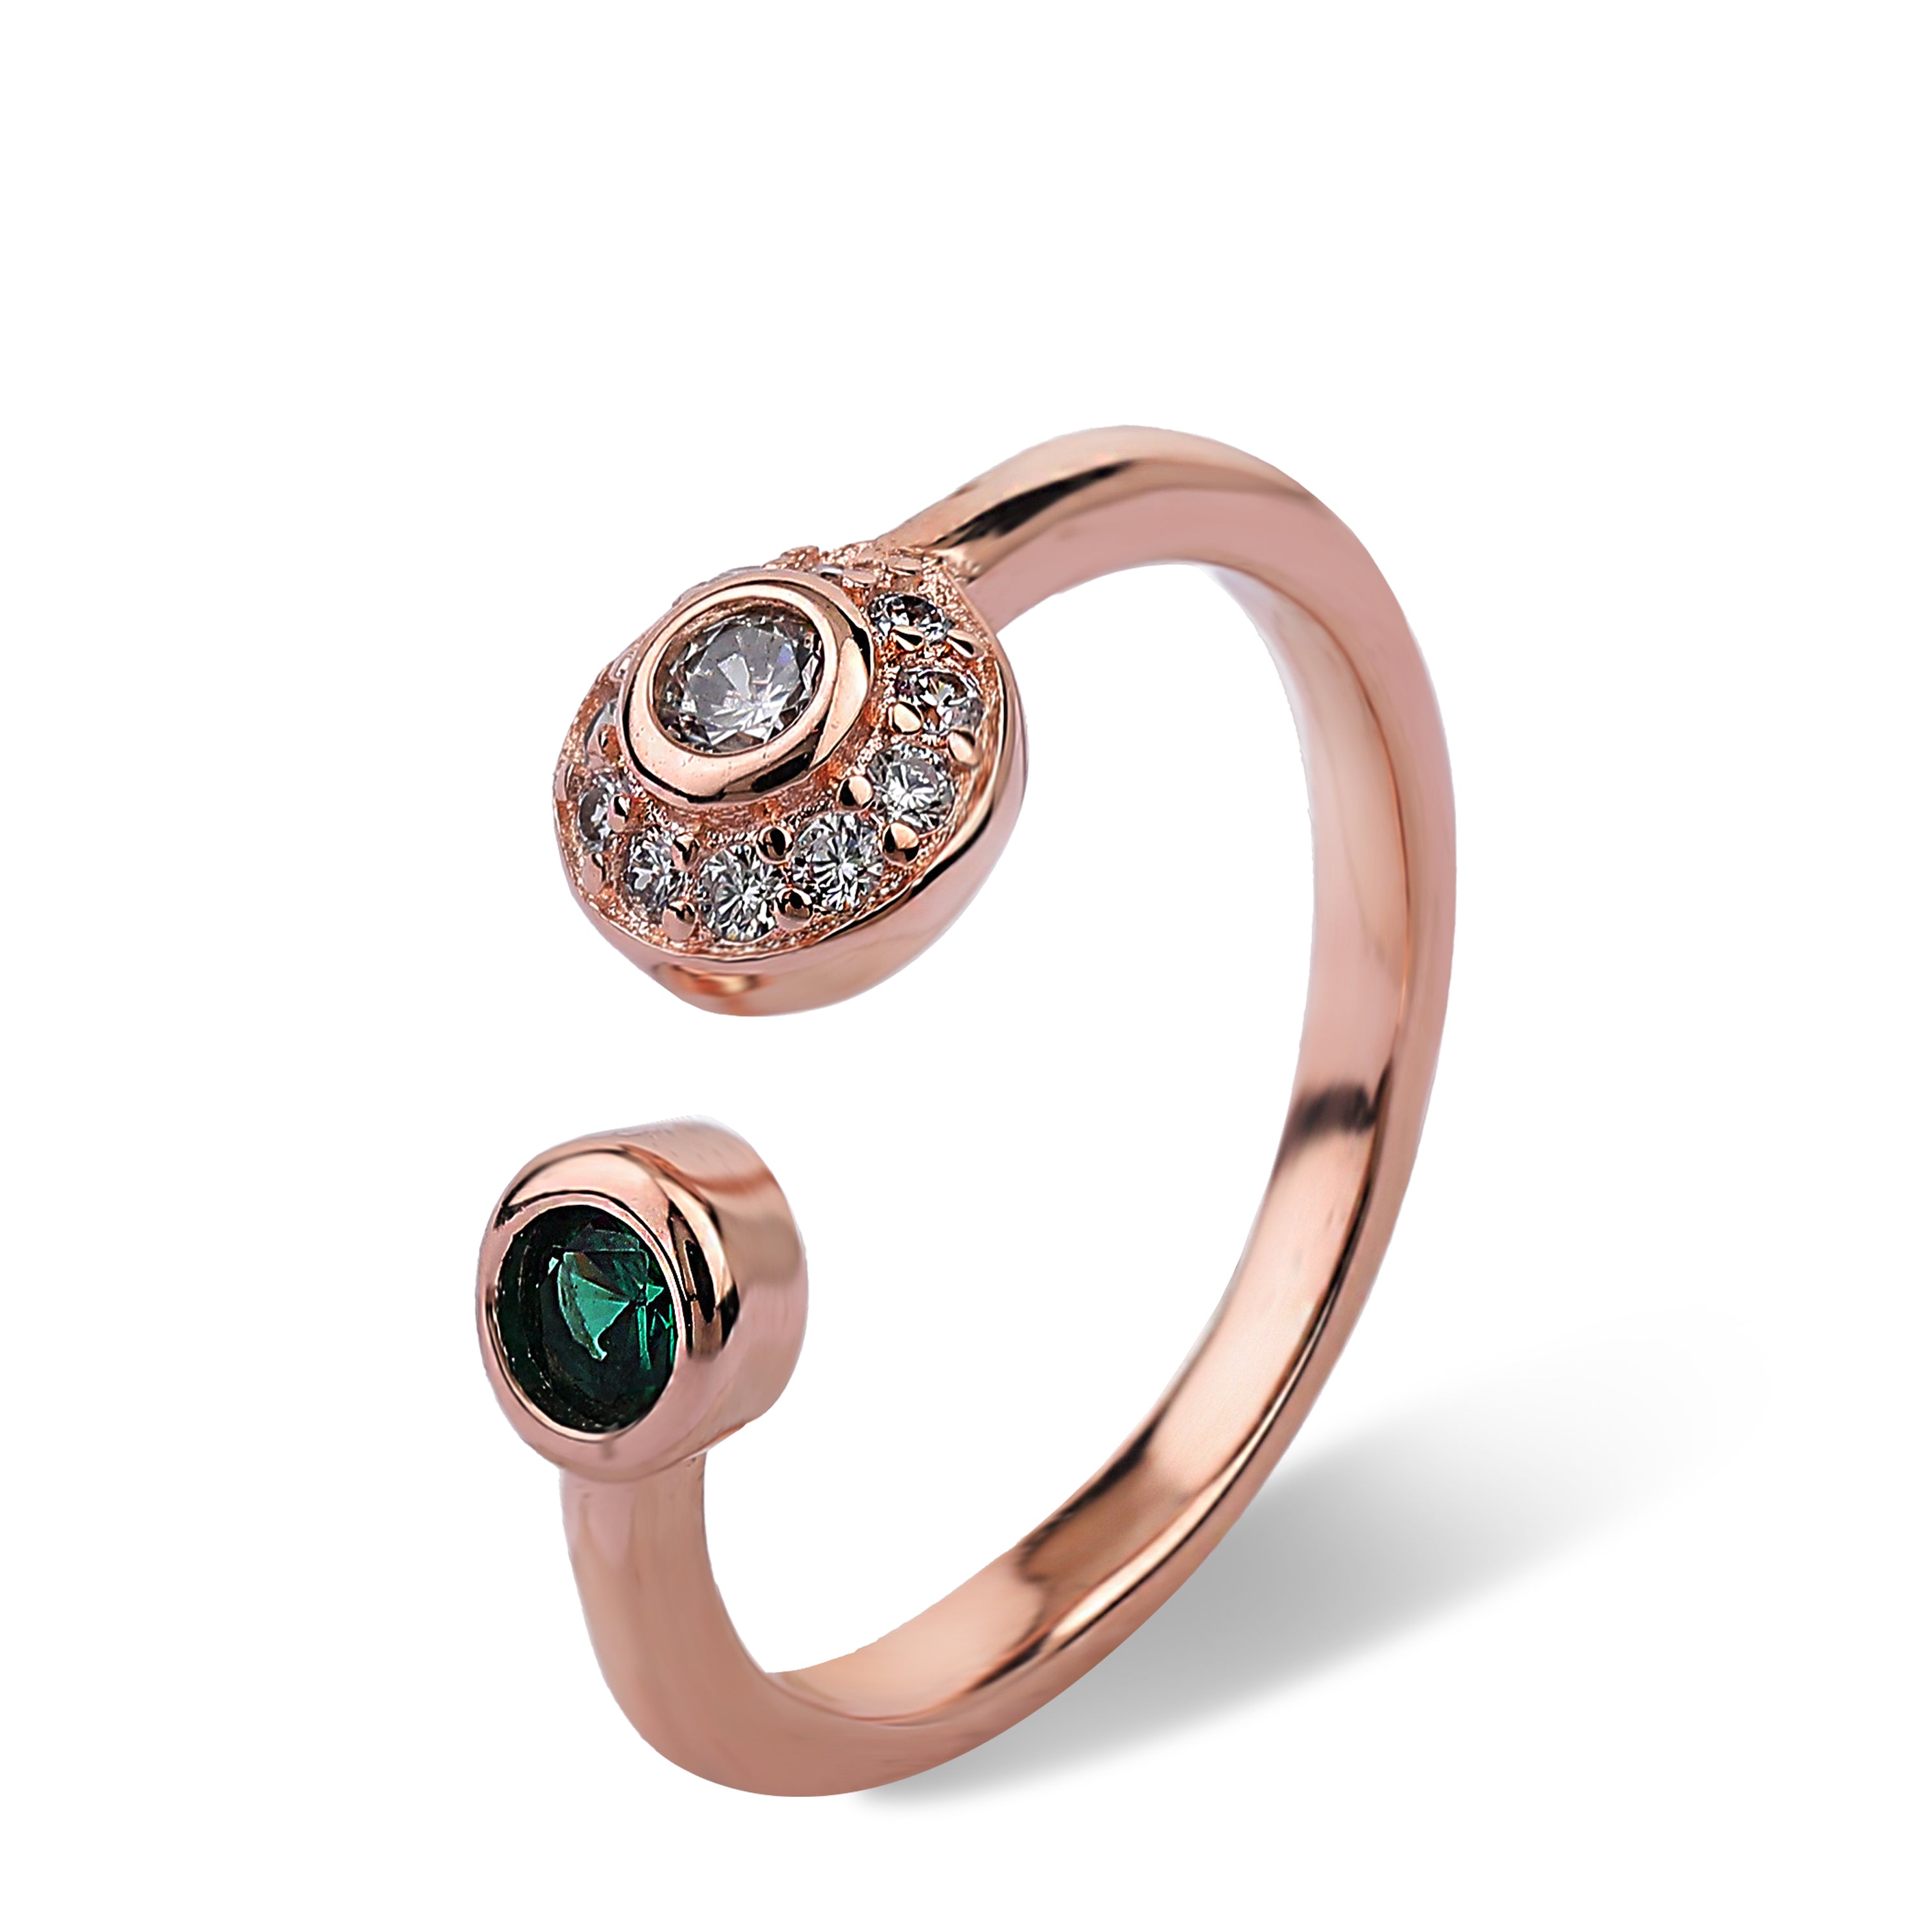 Rose gold traditional ring design with adjustable size